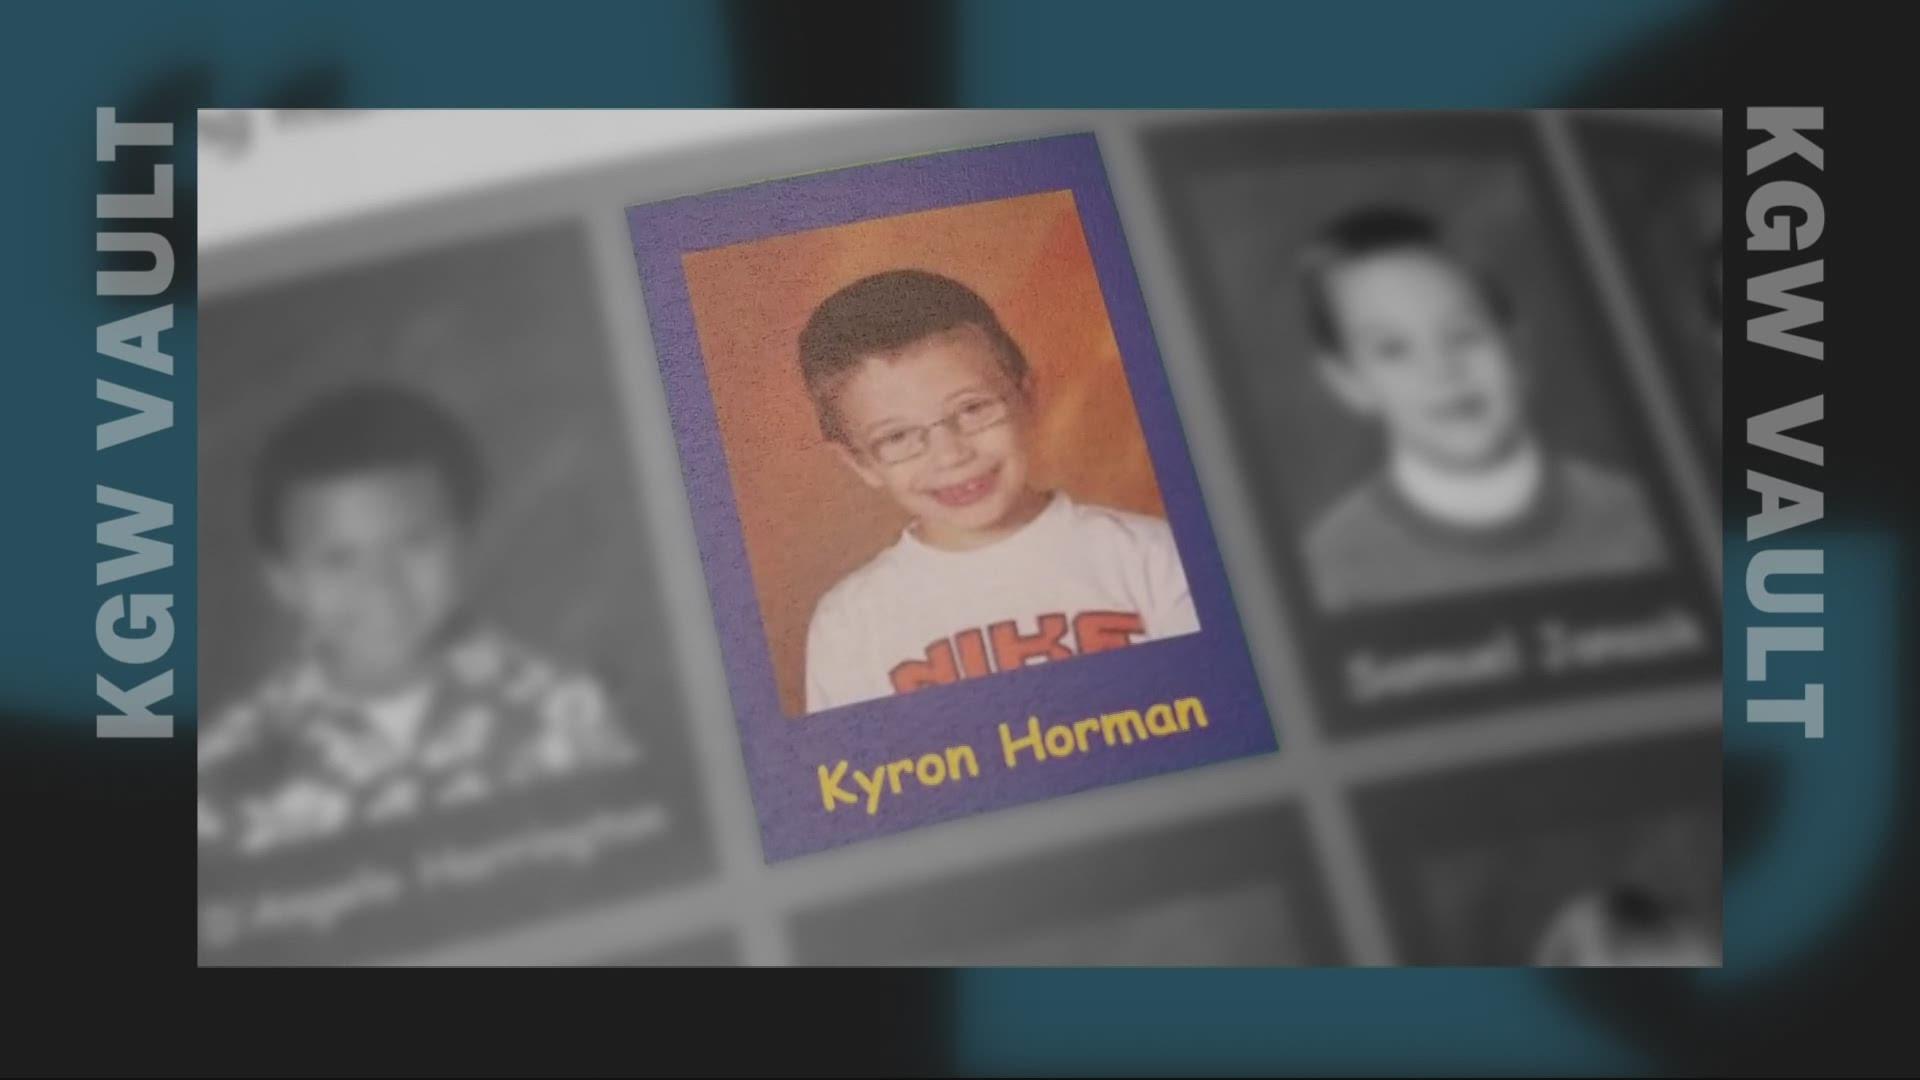 June 4 marks 11 years since 7-year-old Kyron Horman disappeared from Portland's Skyline Elementary School.